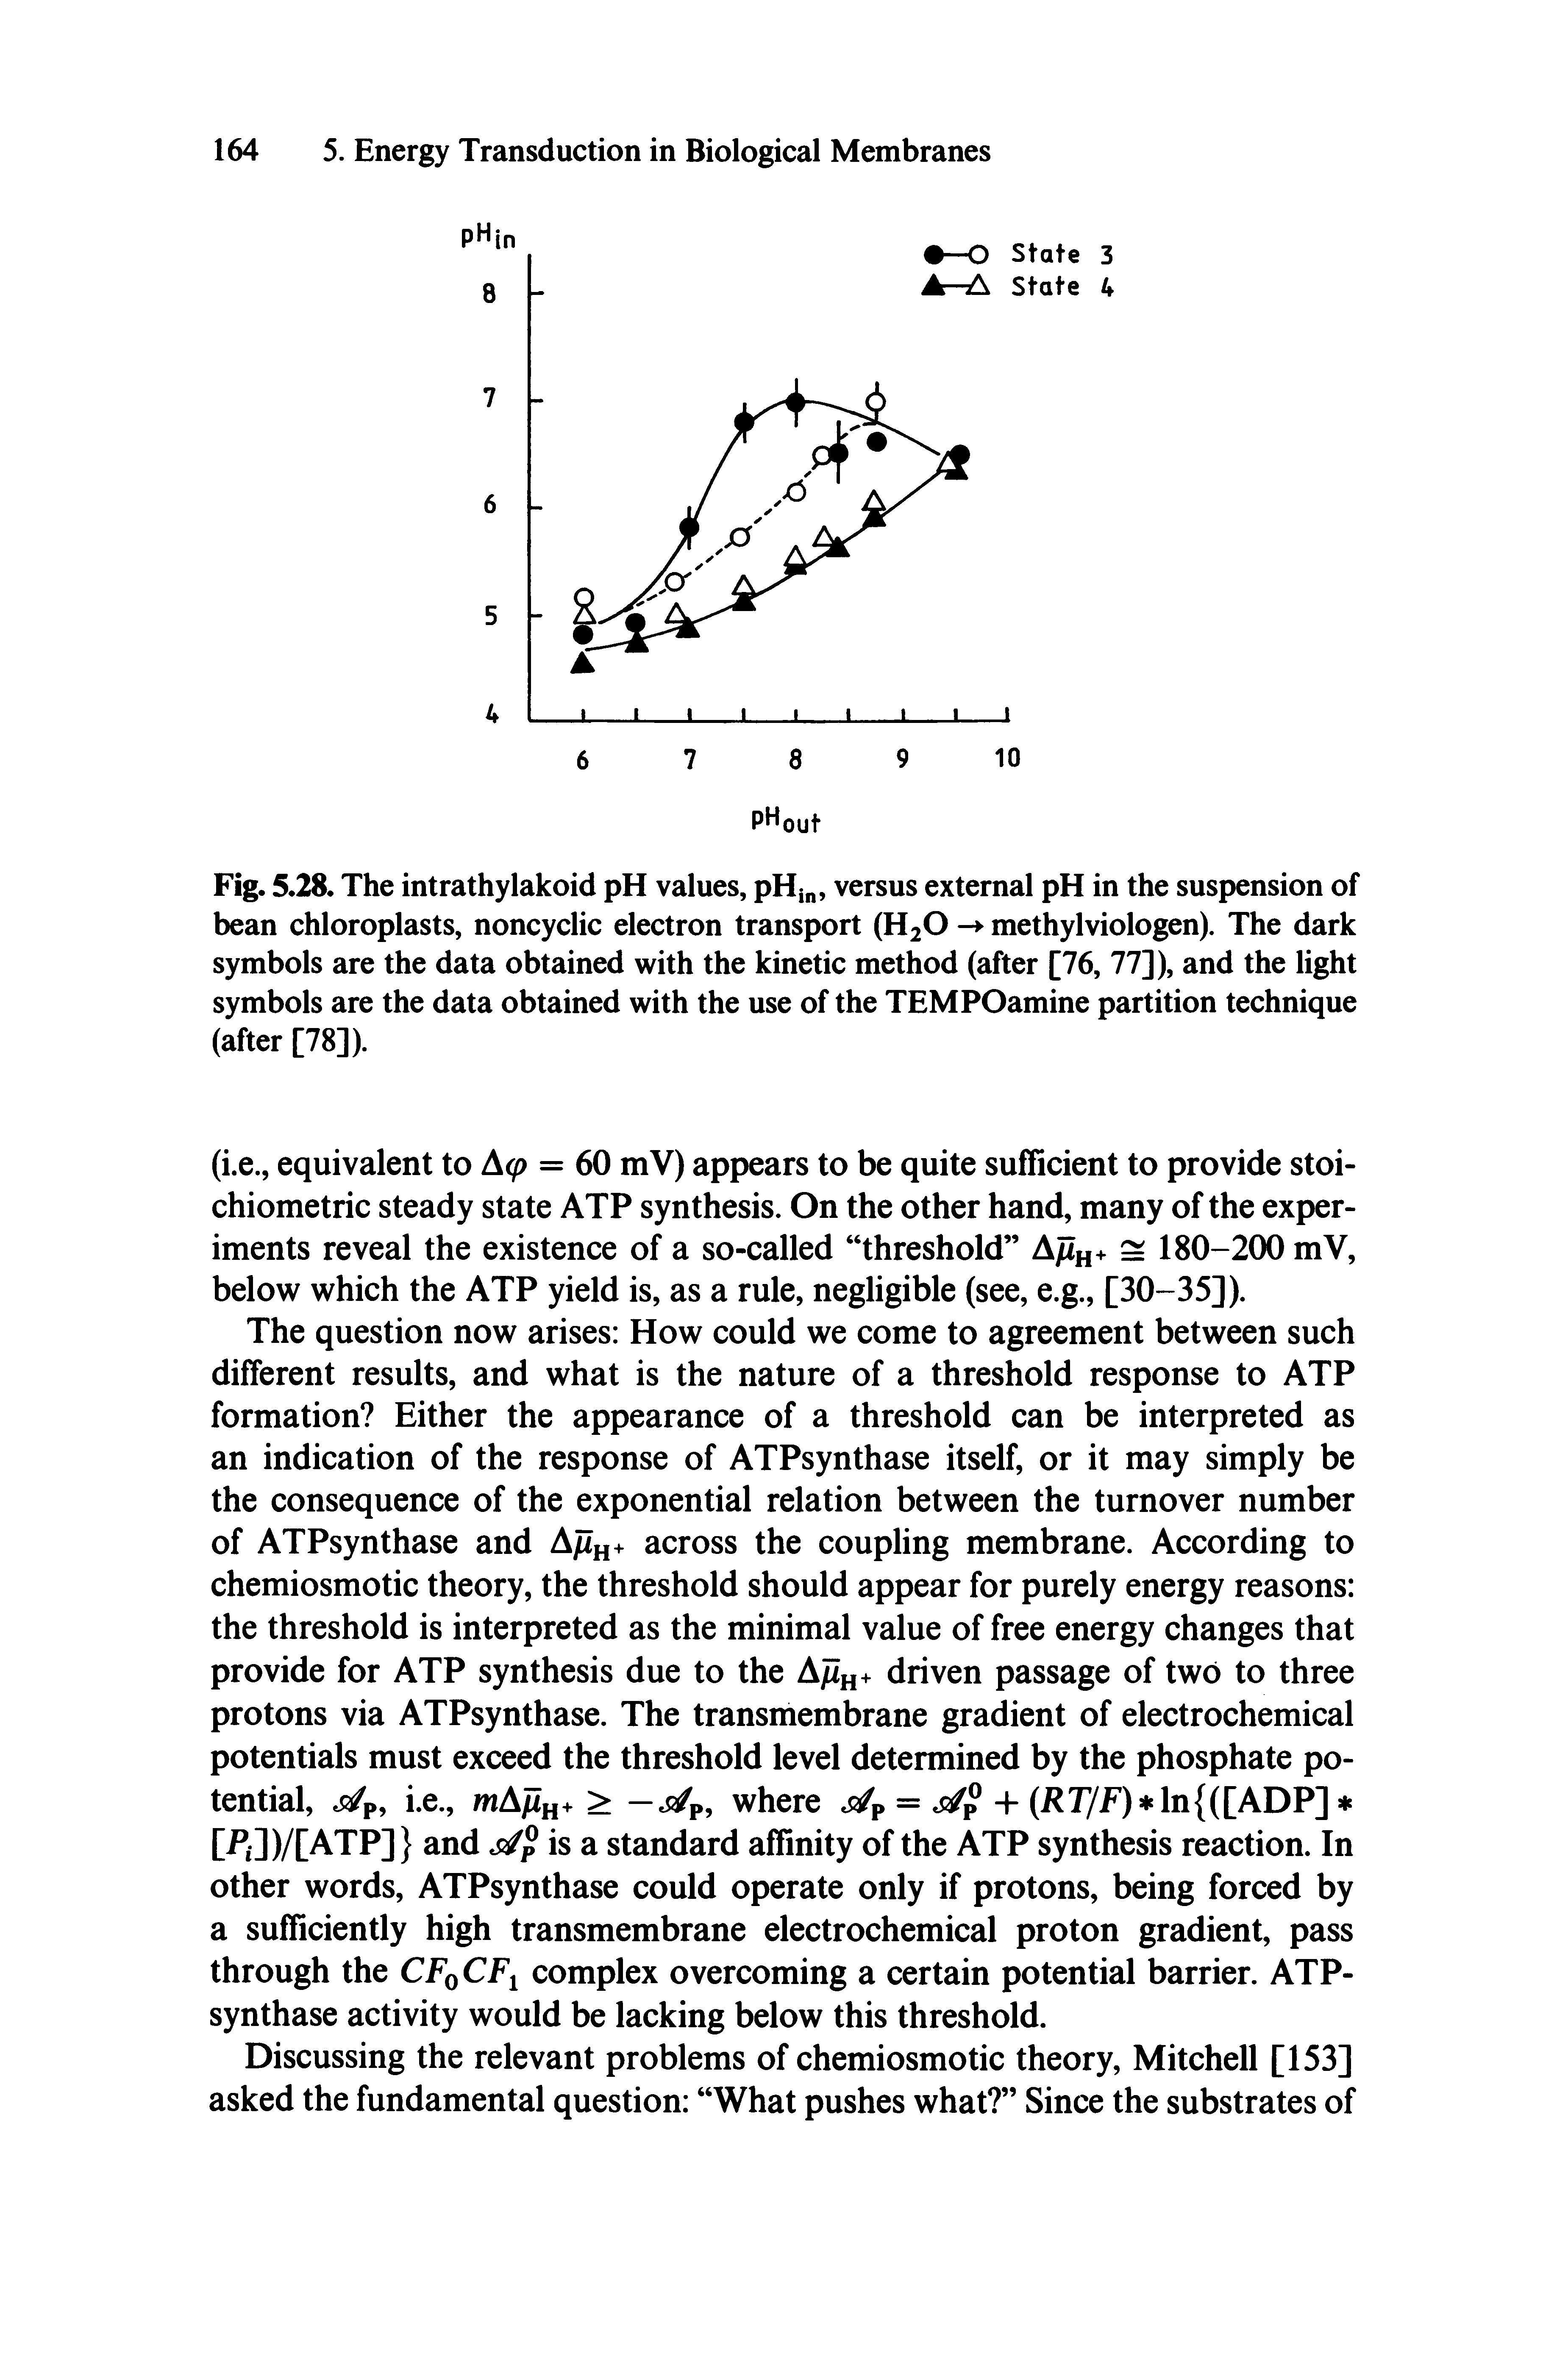 Fig. 5.28. The intrathylakoid pH values, pHj , versus external pH in the suspension of bean chloroplasts, noncyclic electron transport (H2O -> methylviologen). The dark symbols are the data obtained with the kinetic method (after [76, 77]), and the light symbols are the data obtained with the use of the TEMPOamine partition technique (after [78]).